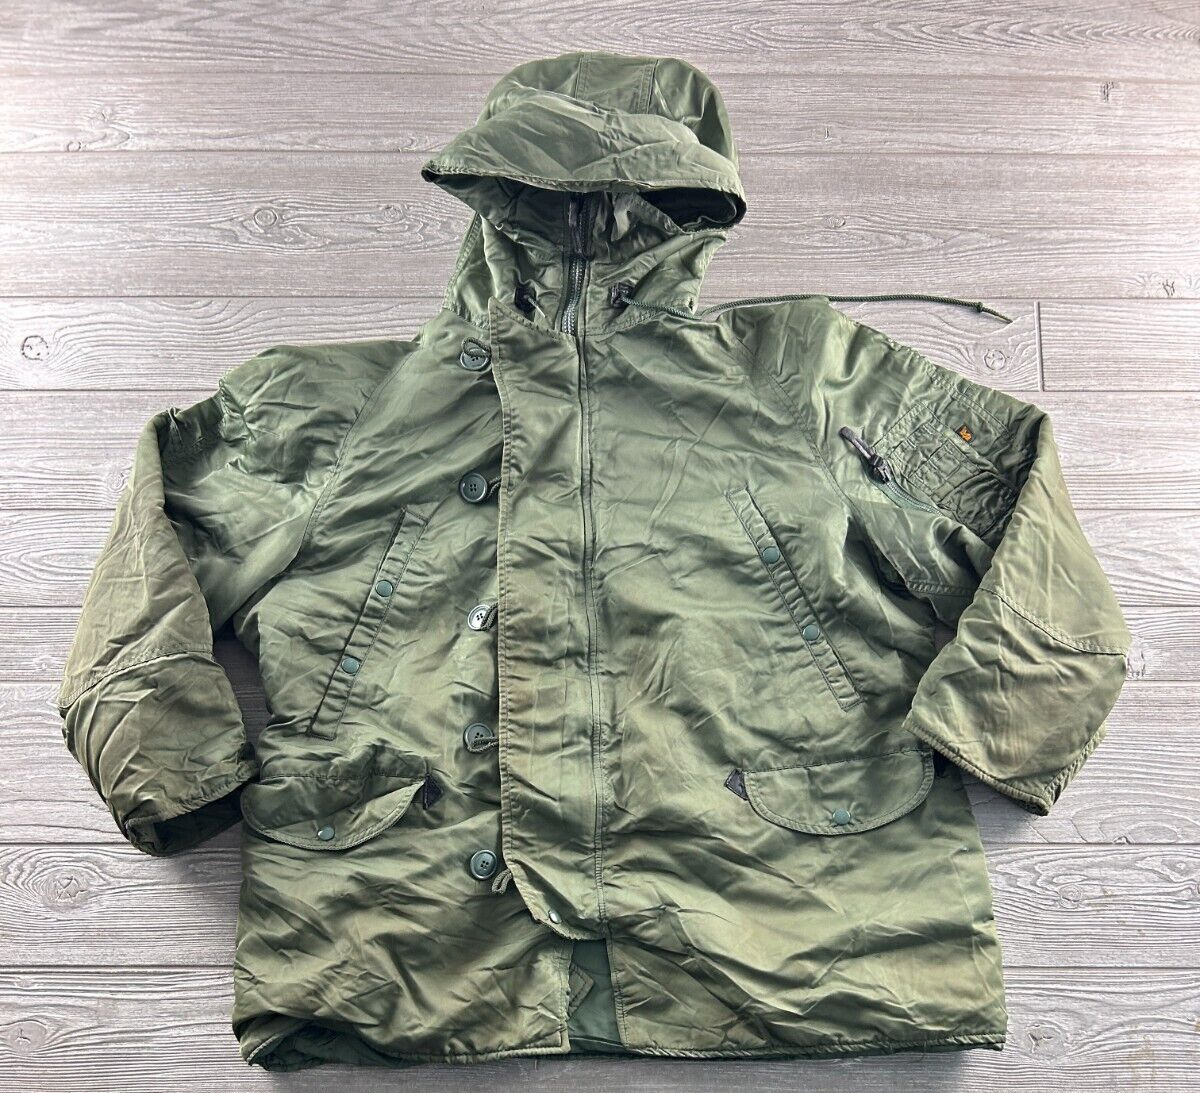 Extreme Cold Weather Parka 1615-573-8335 Jacket Type N-3B Size Large Green